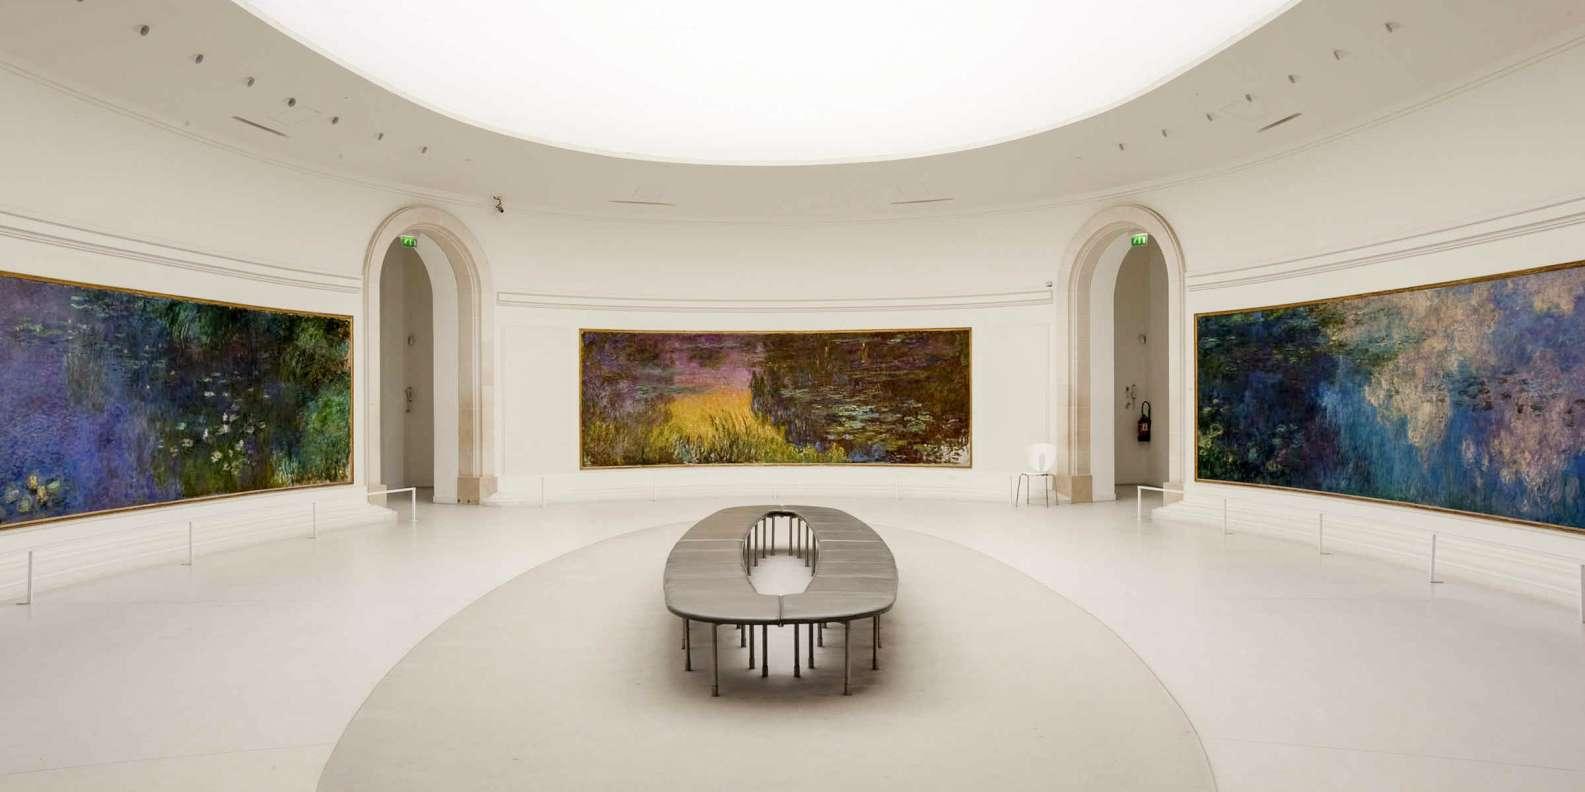 Visit the oval-shaped room showcasing Monet's amazing works